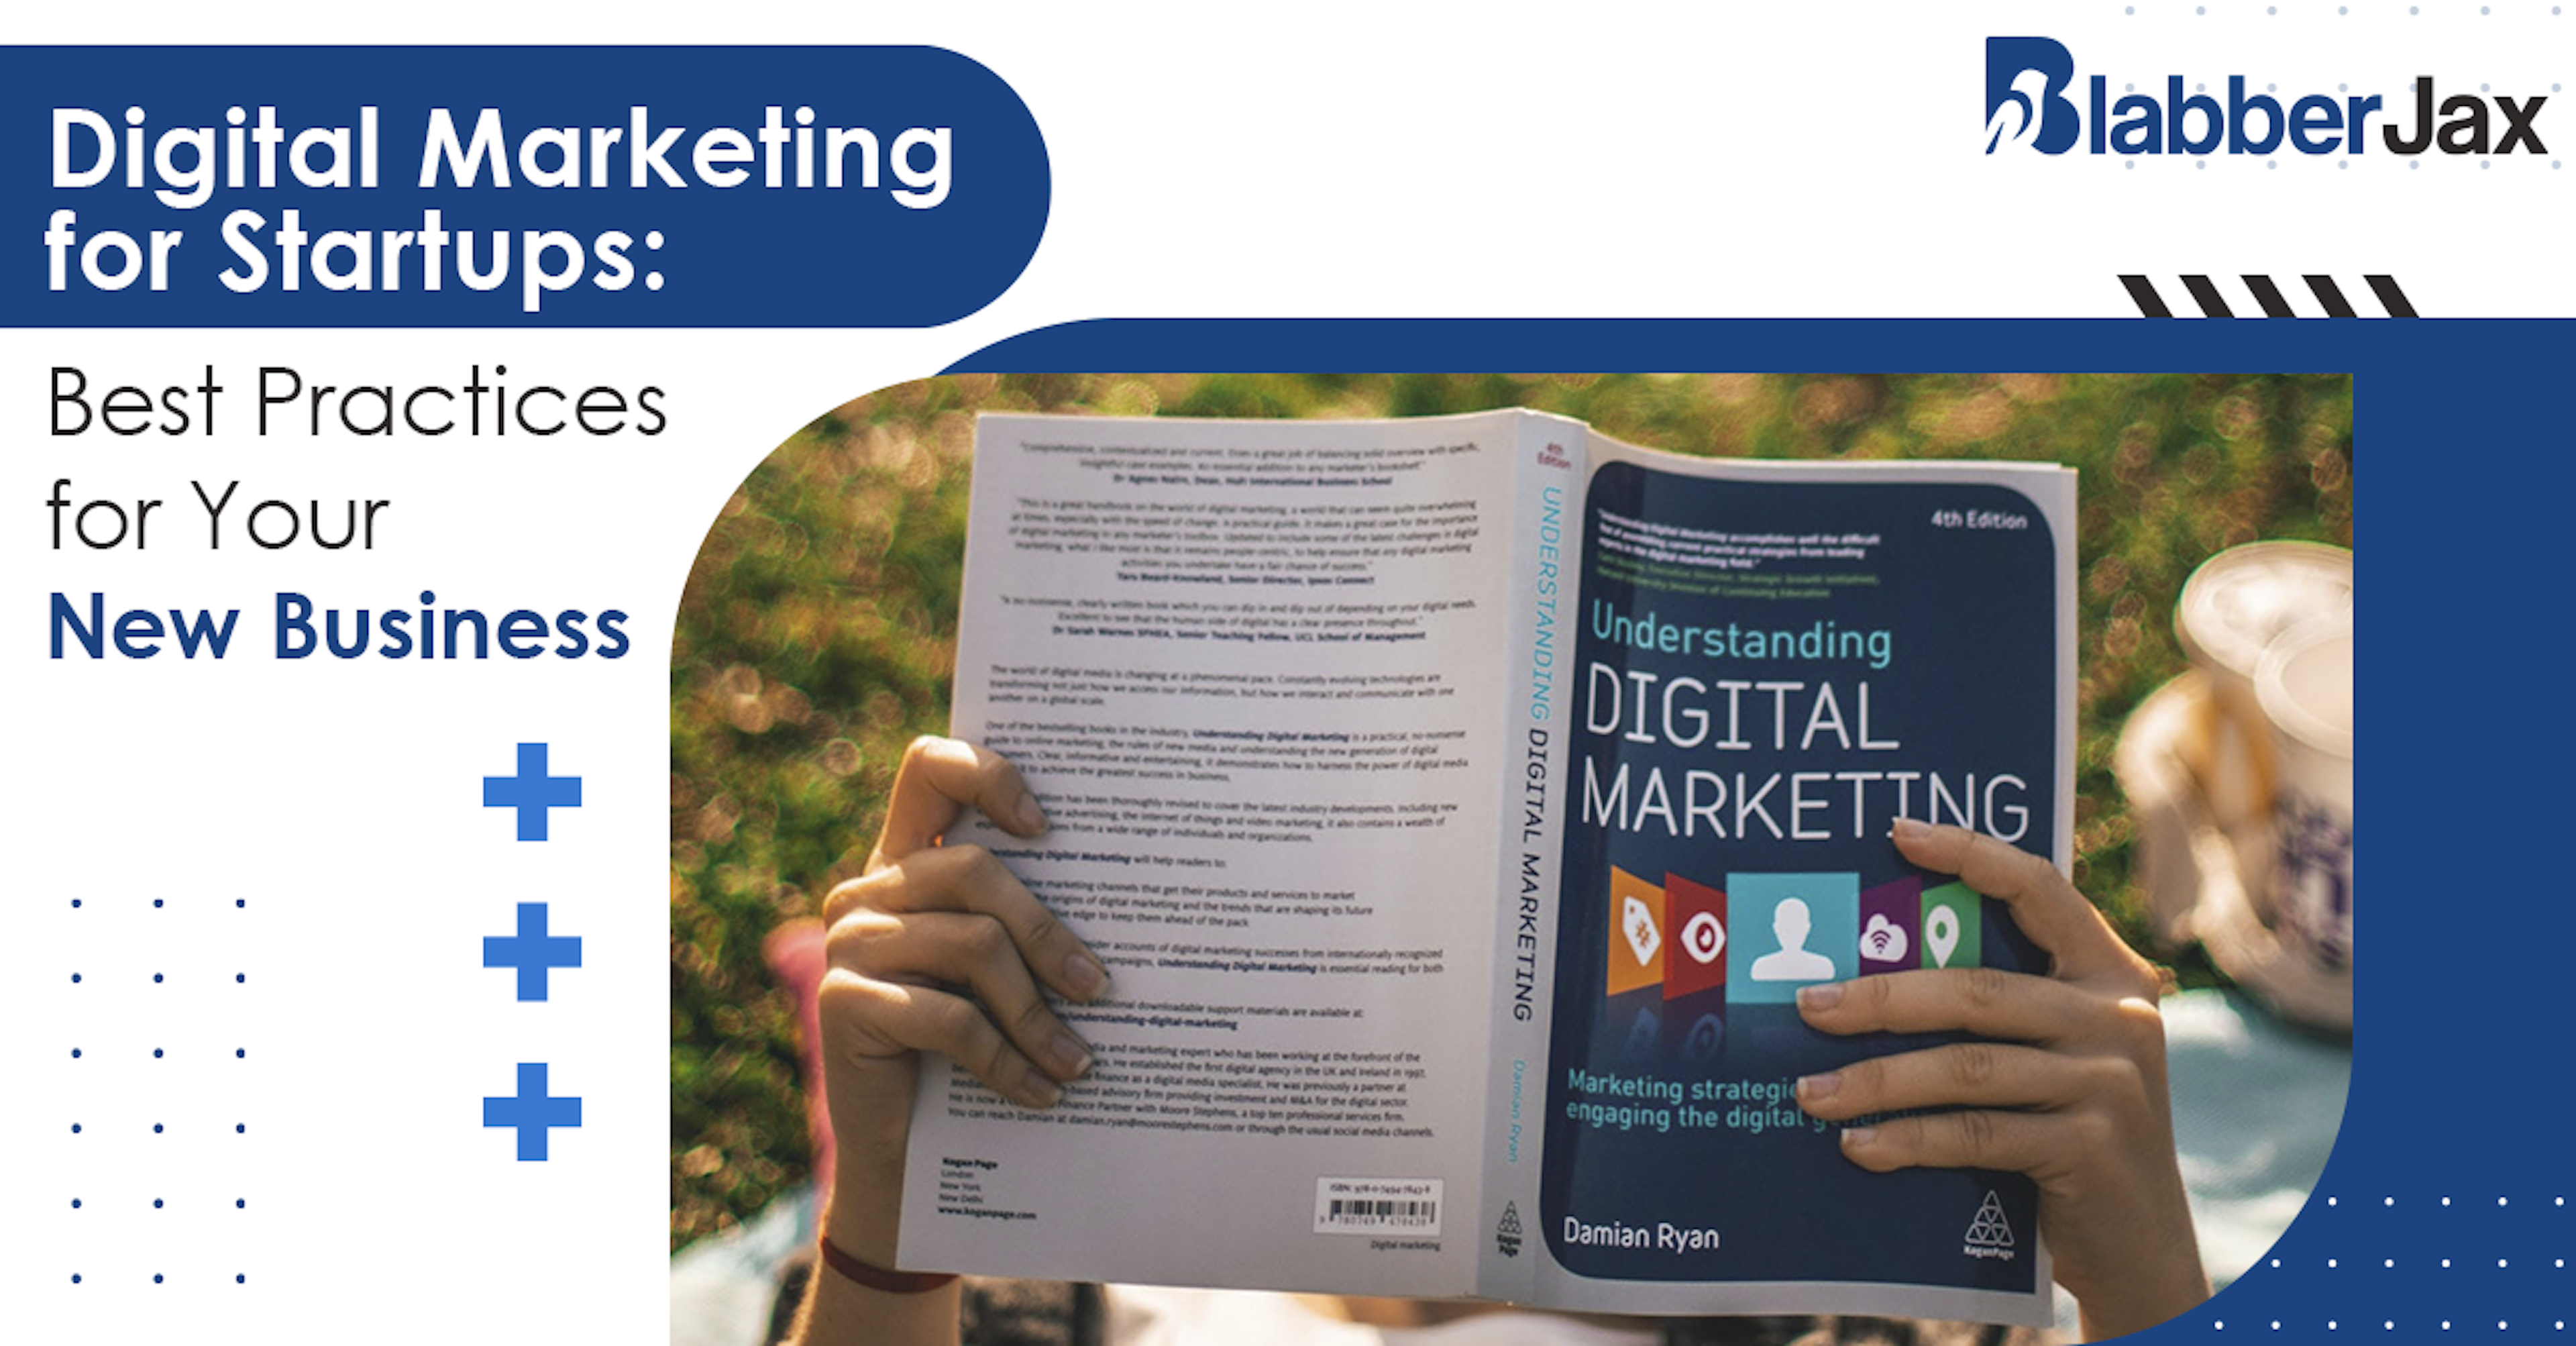 Digital Marketing for Startups: Best Practices for Your New Business